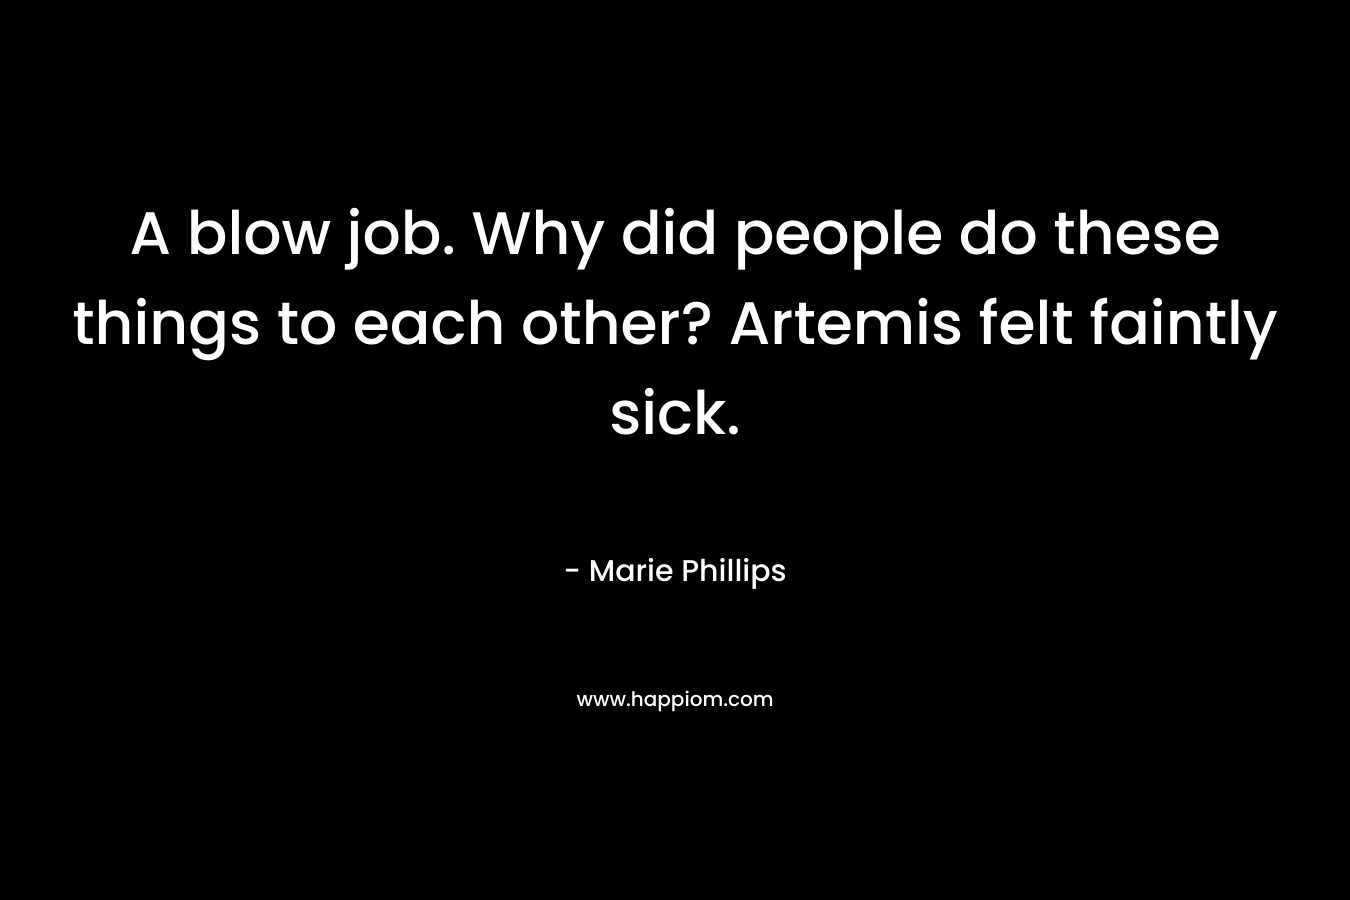 A blow job. Why did people do these things to each other? Artemis felt faintly sick.